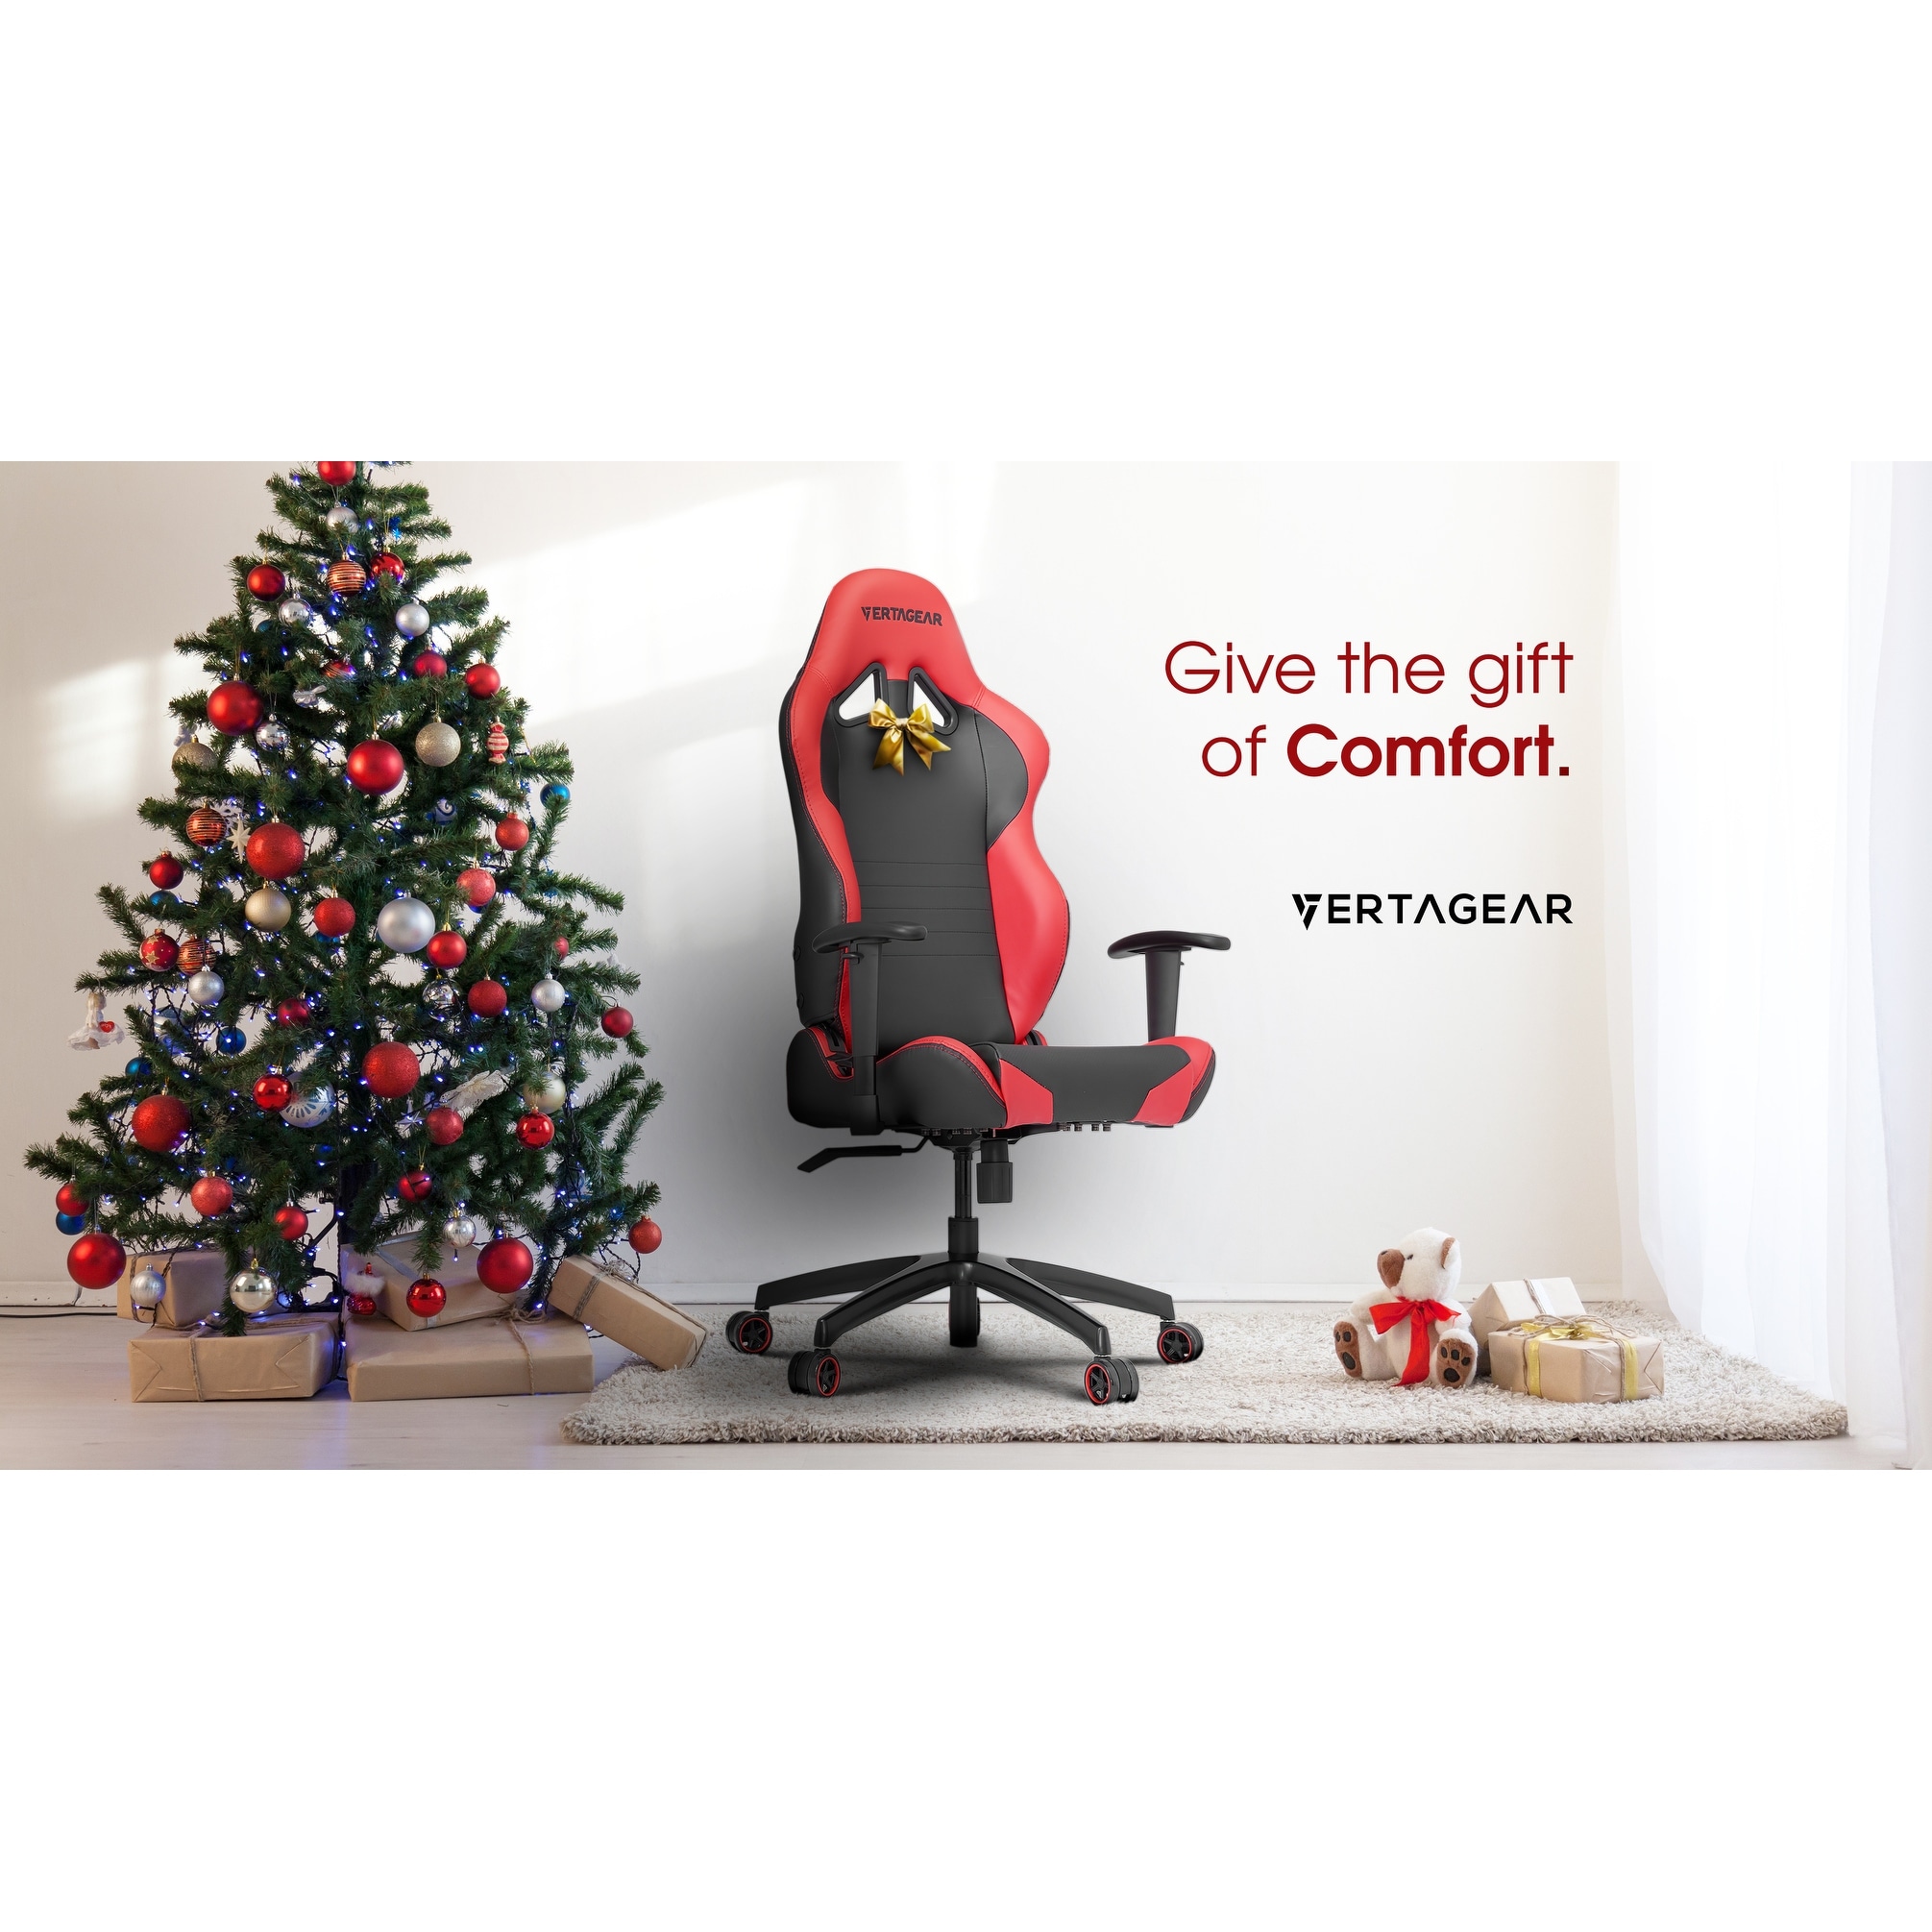 vertagear sline sl2000 premium gaming chair  recommended